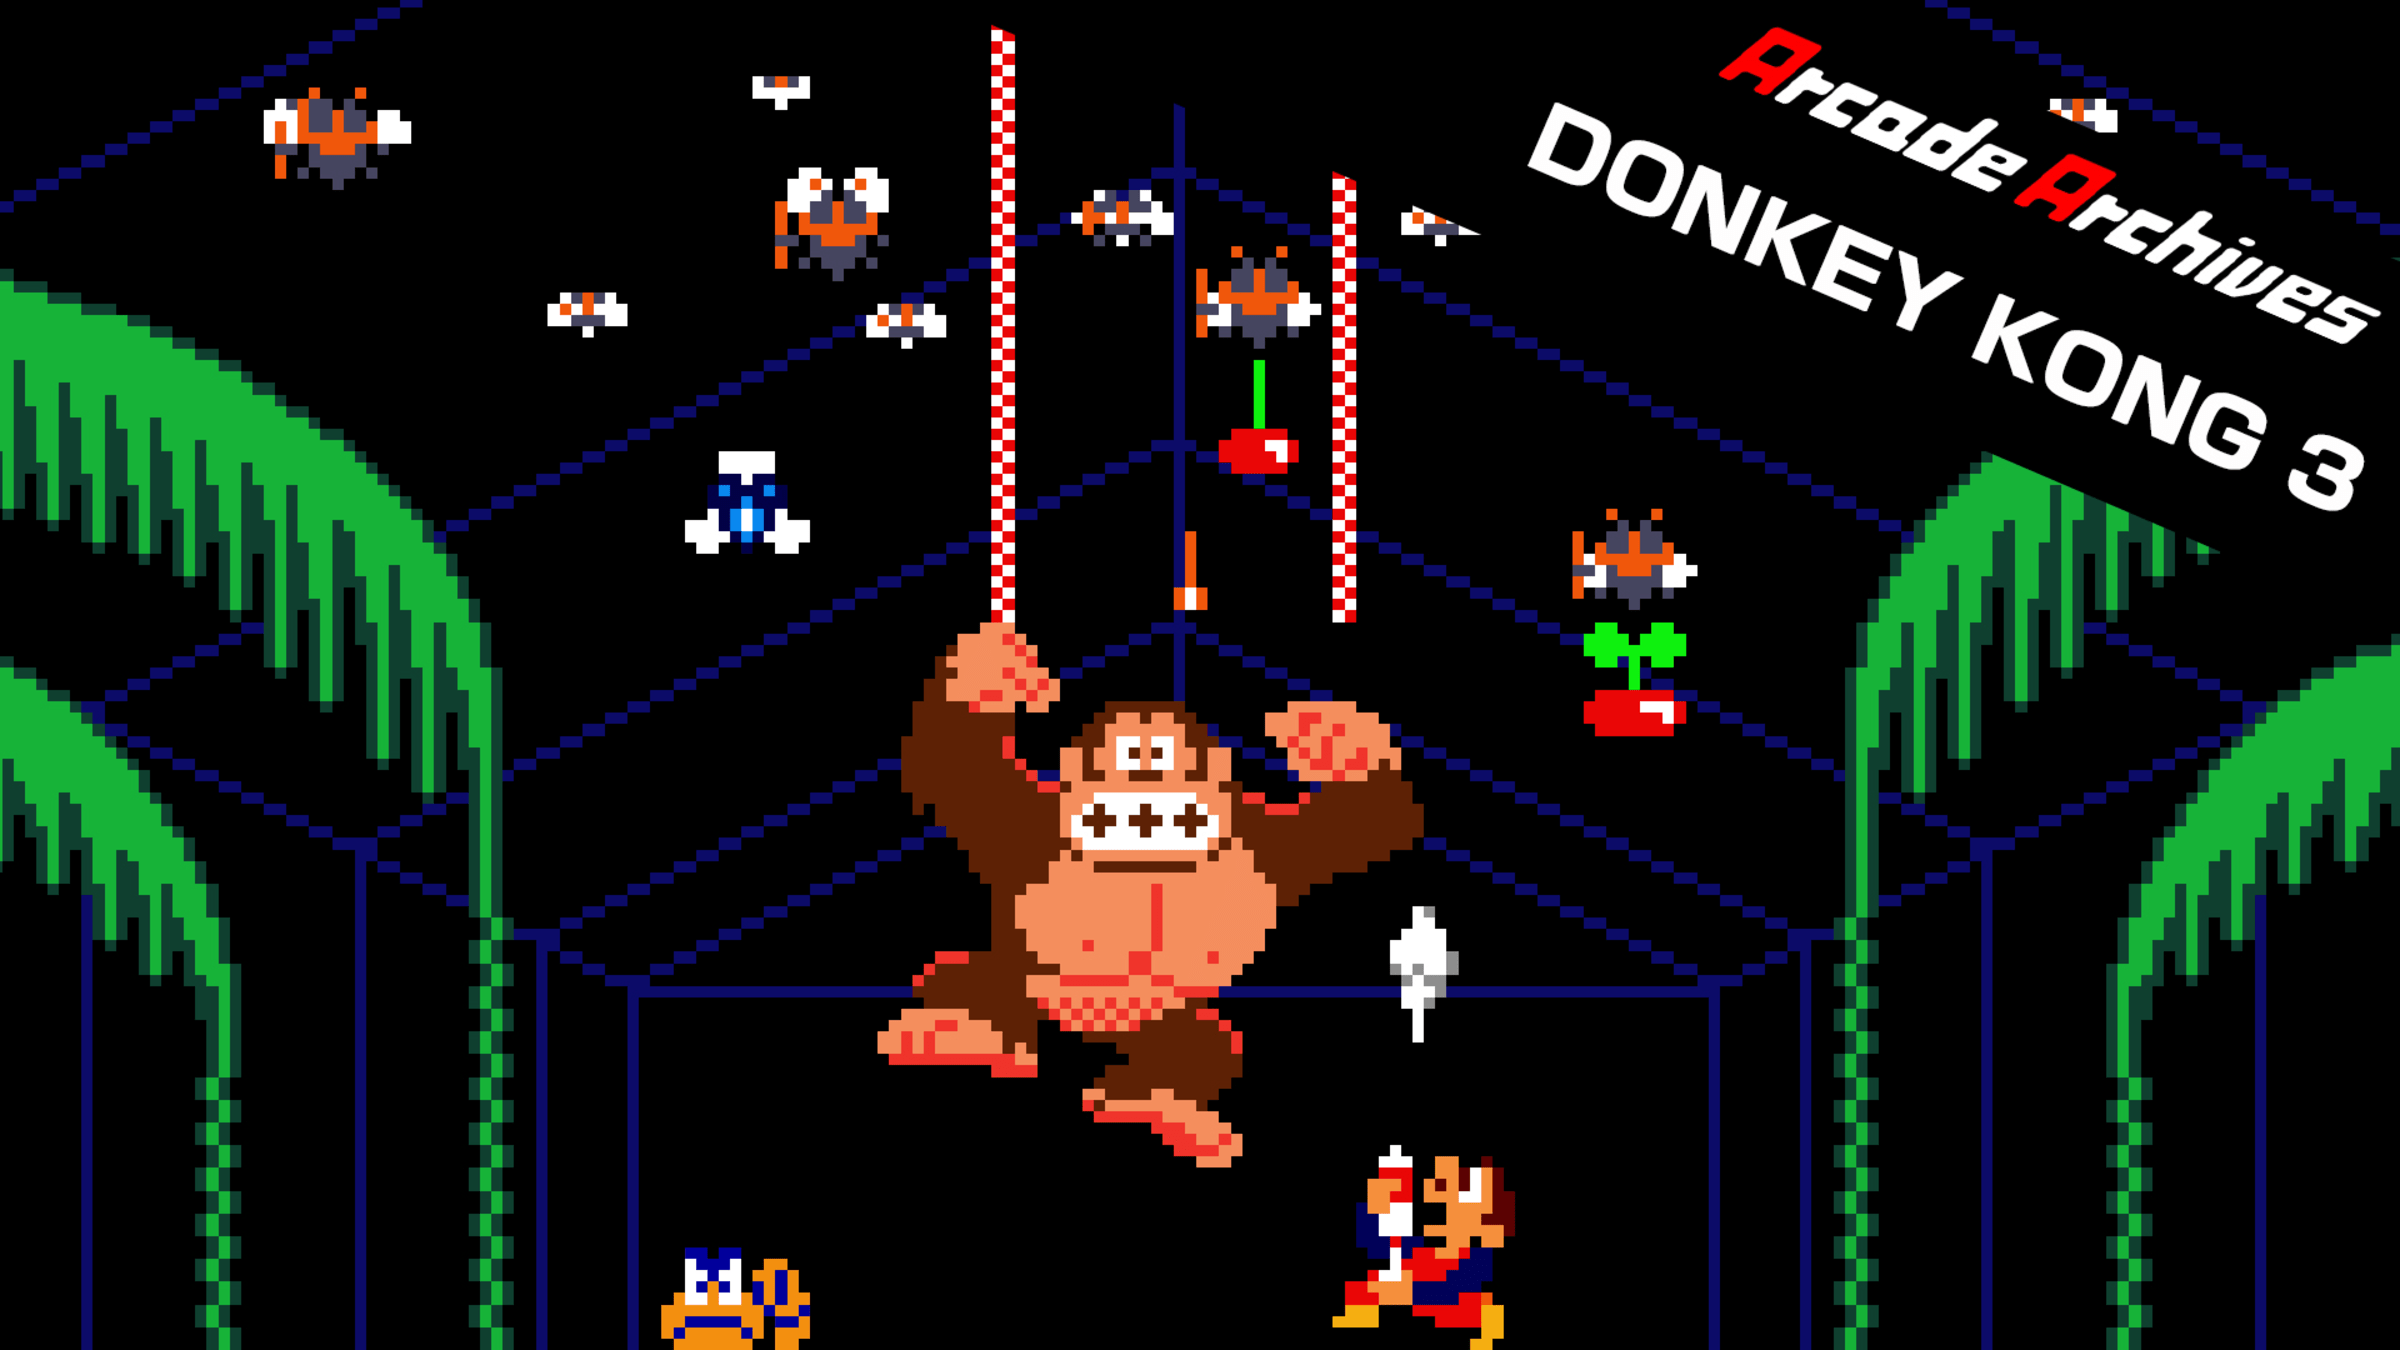 Arcade Archives DONKEY KONG 3 for Nintendo Switch - Nintendo Official Site